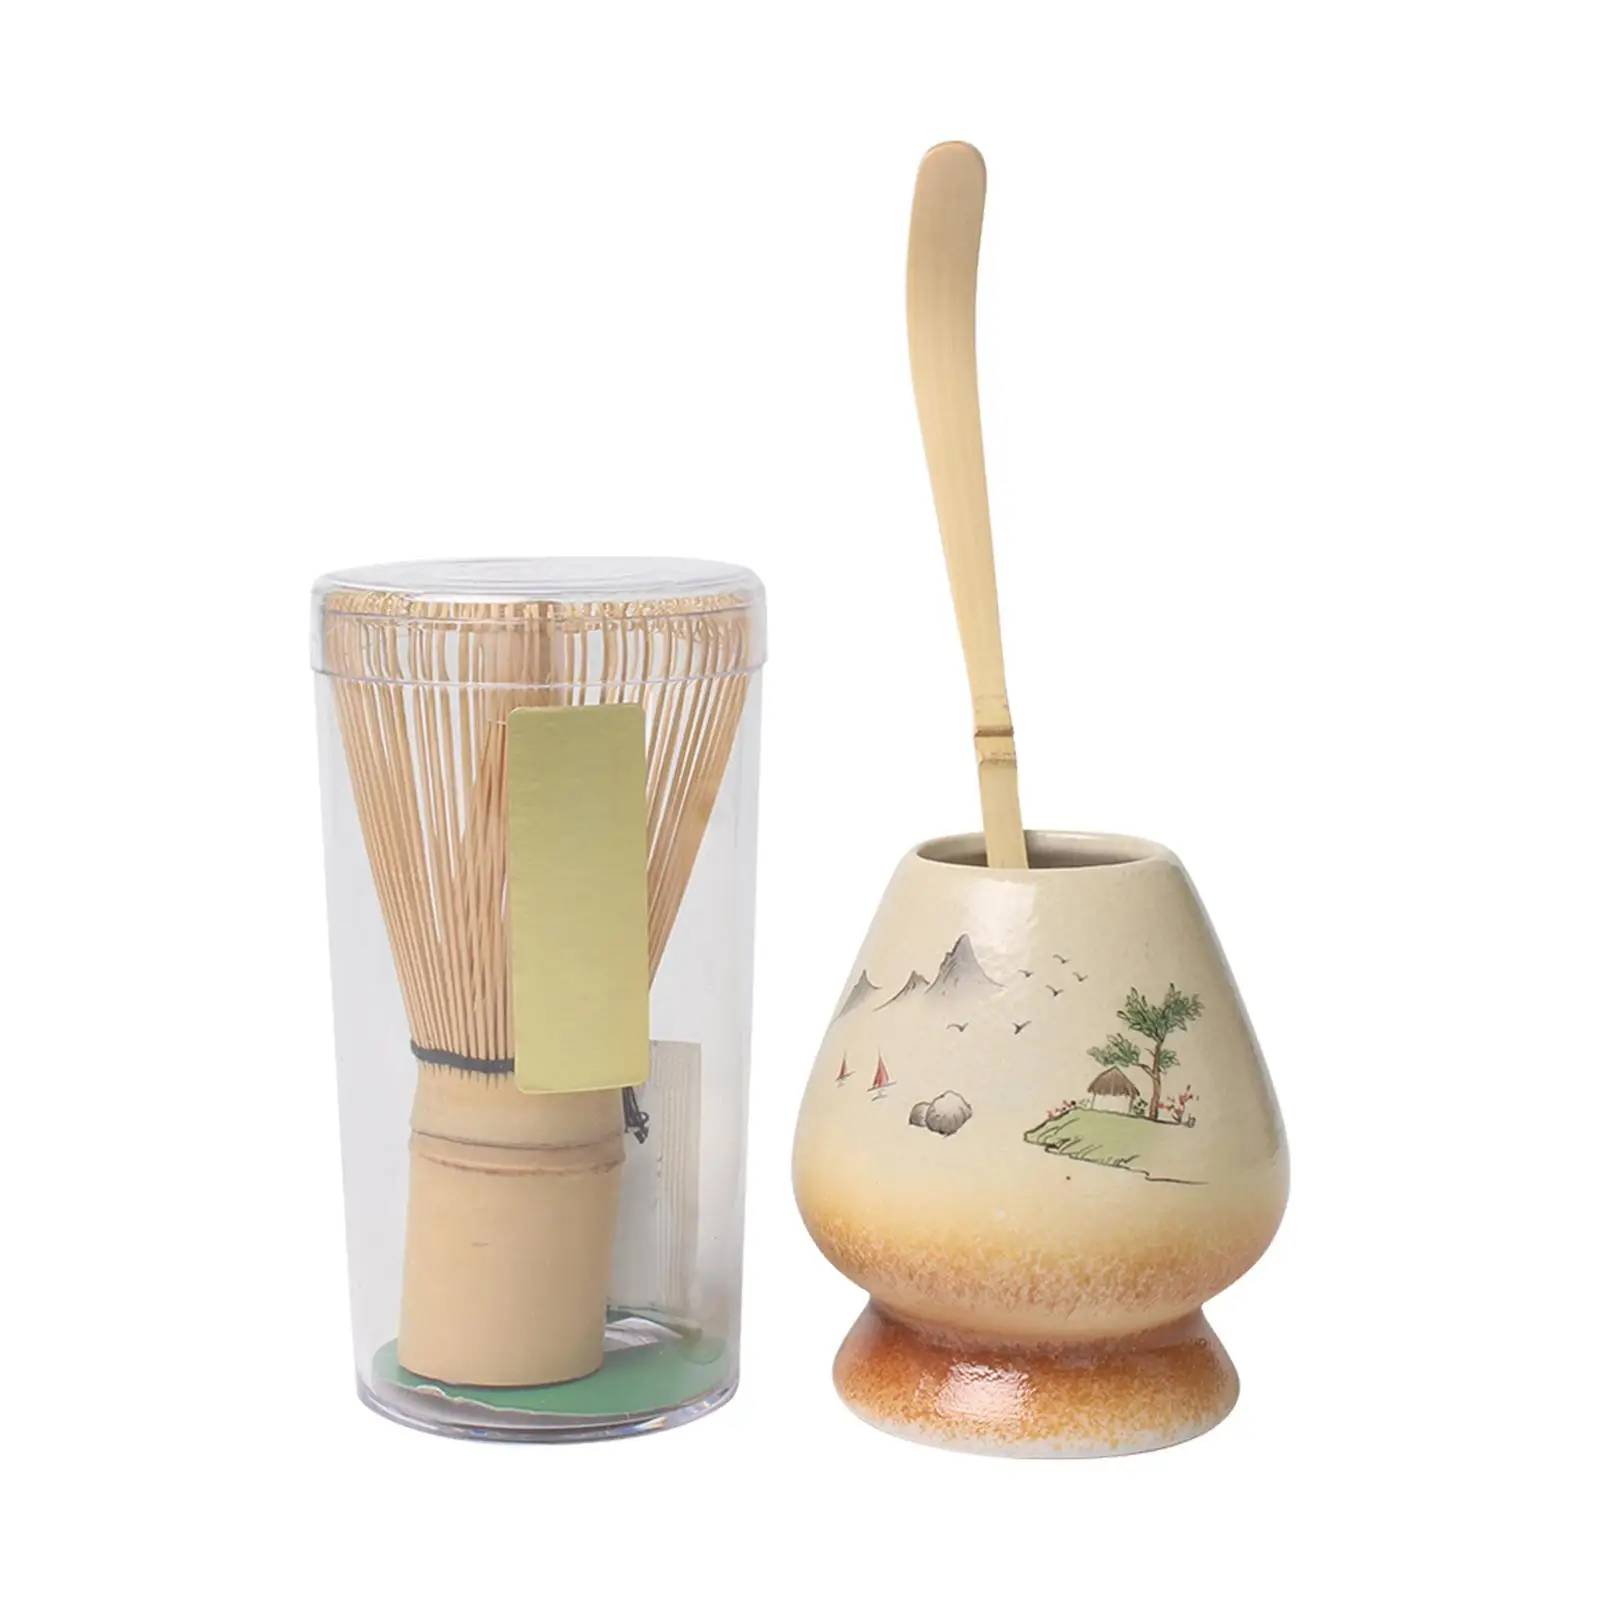 3 Pieces Matcha Ceremony Set Matcha Whisk and Bowl for Matcha Ceremony Beginner